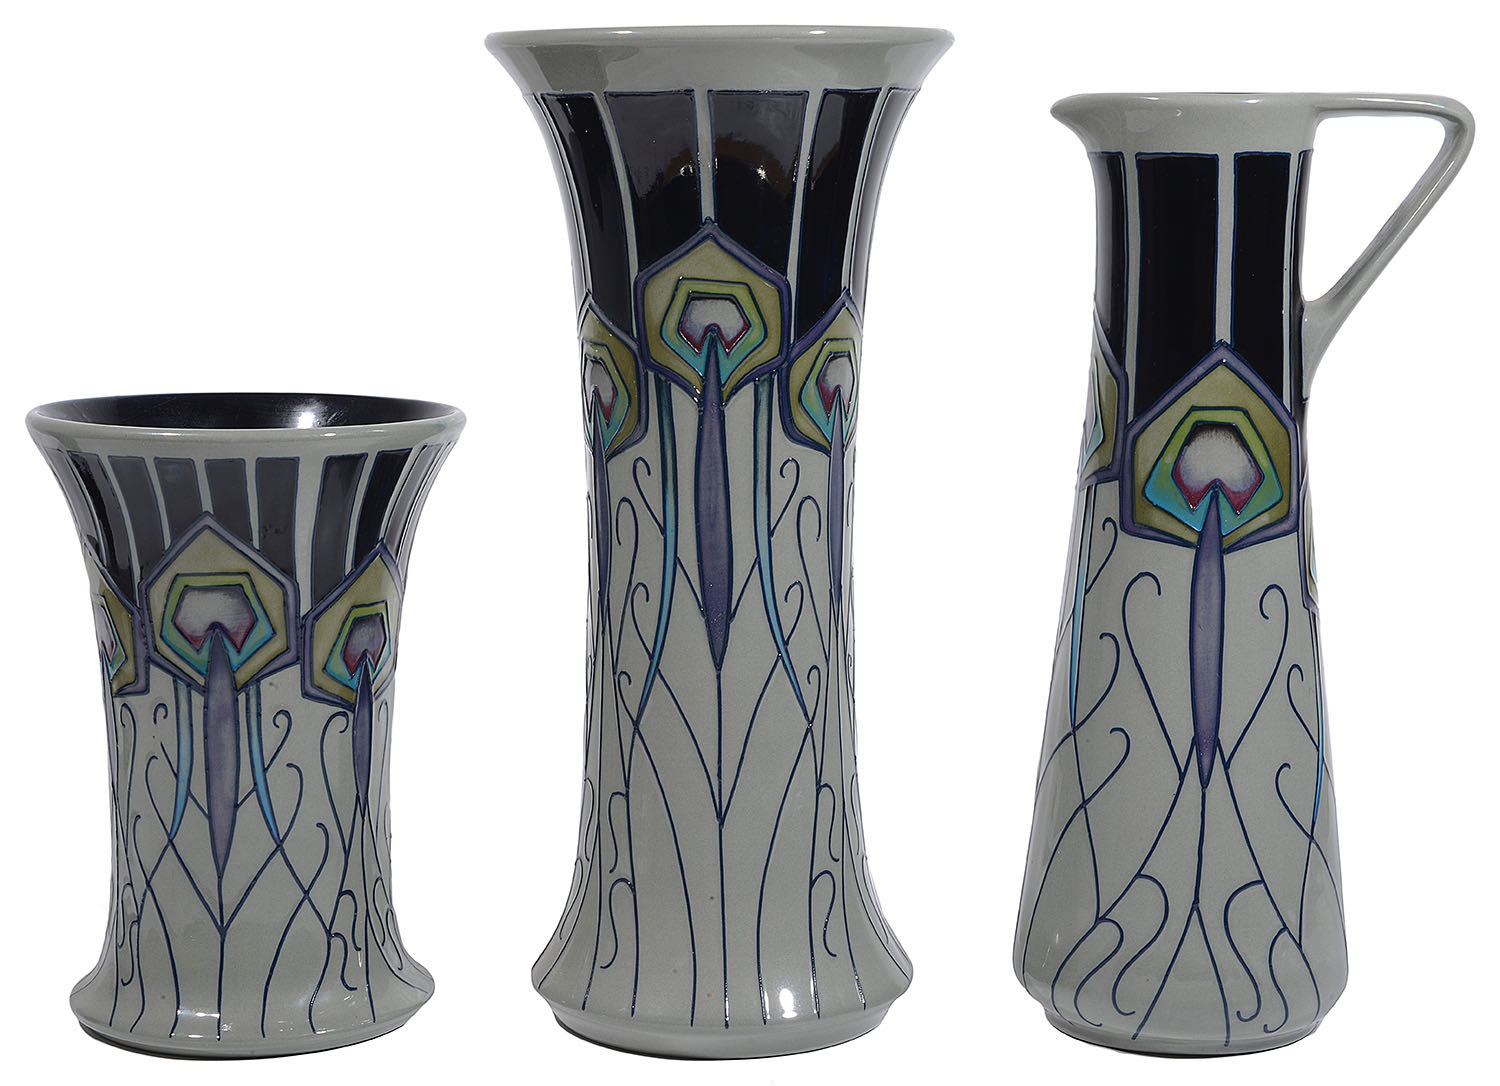 Three pieces of modern Moorcroft pottery in 'Peacock Parade' pattern designed by Nicola Slaney